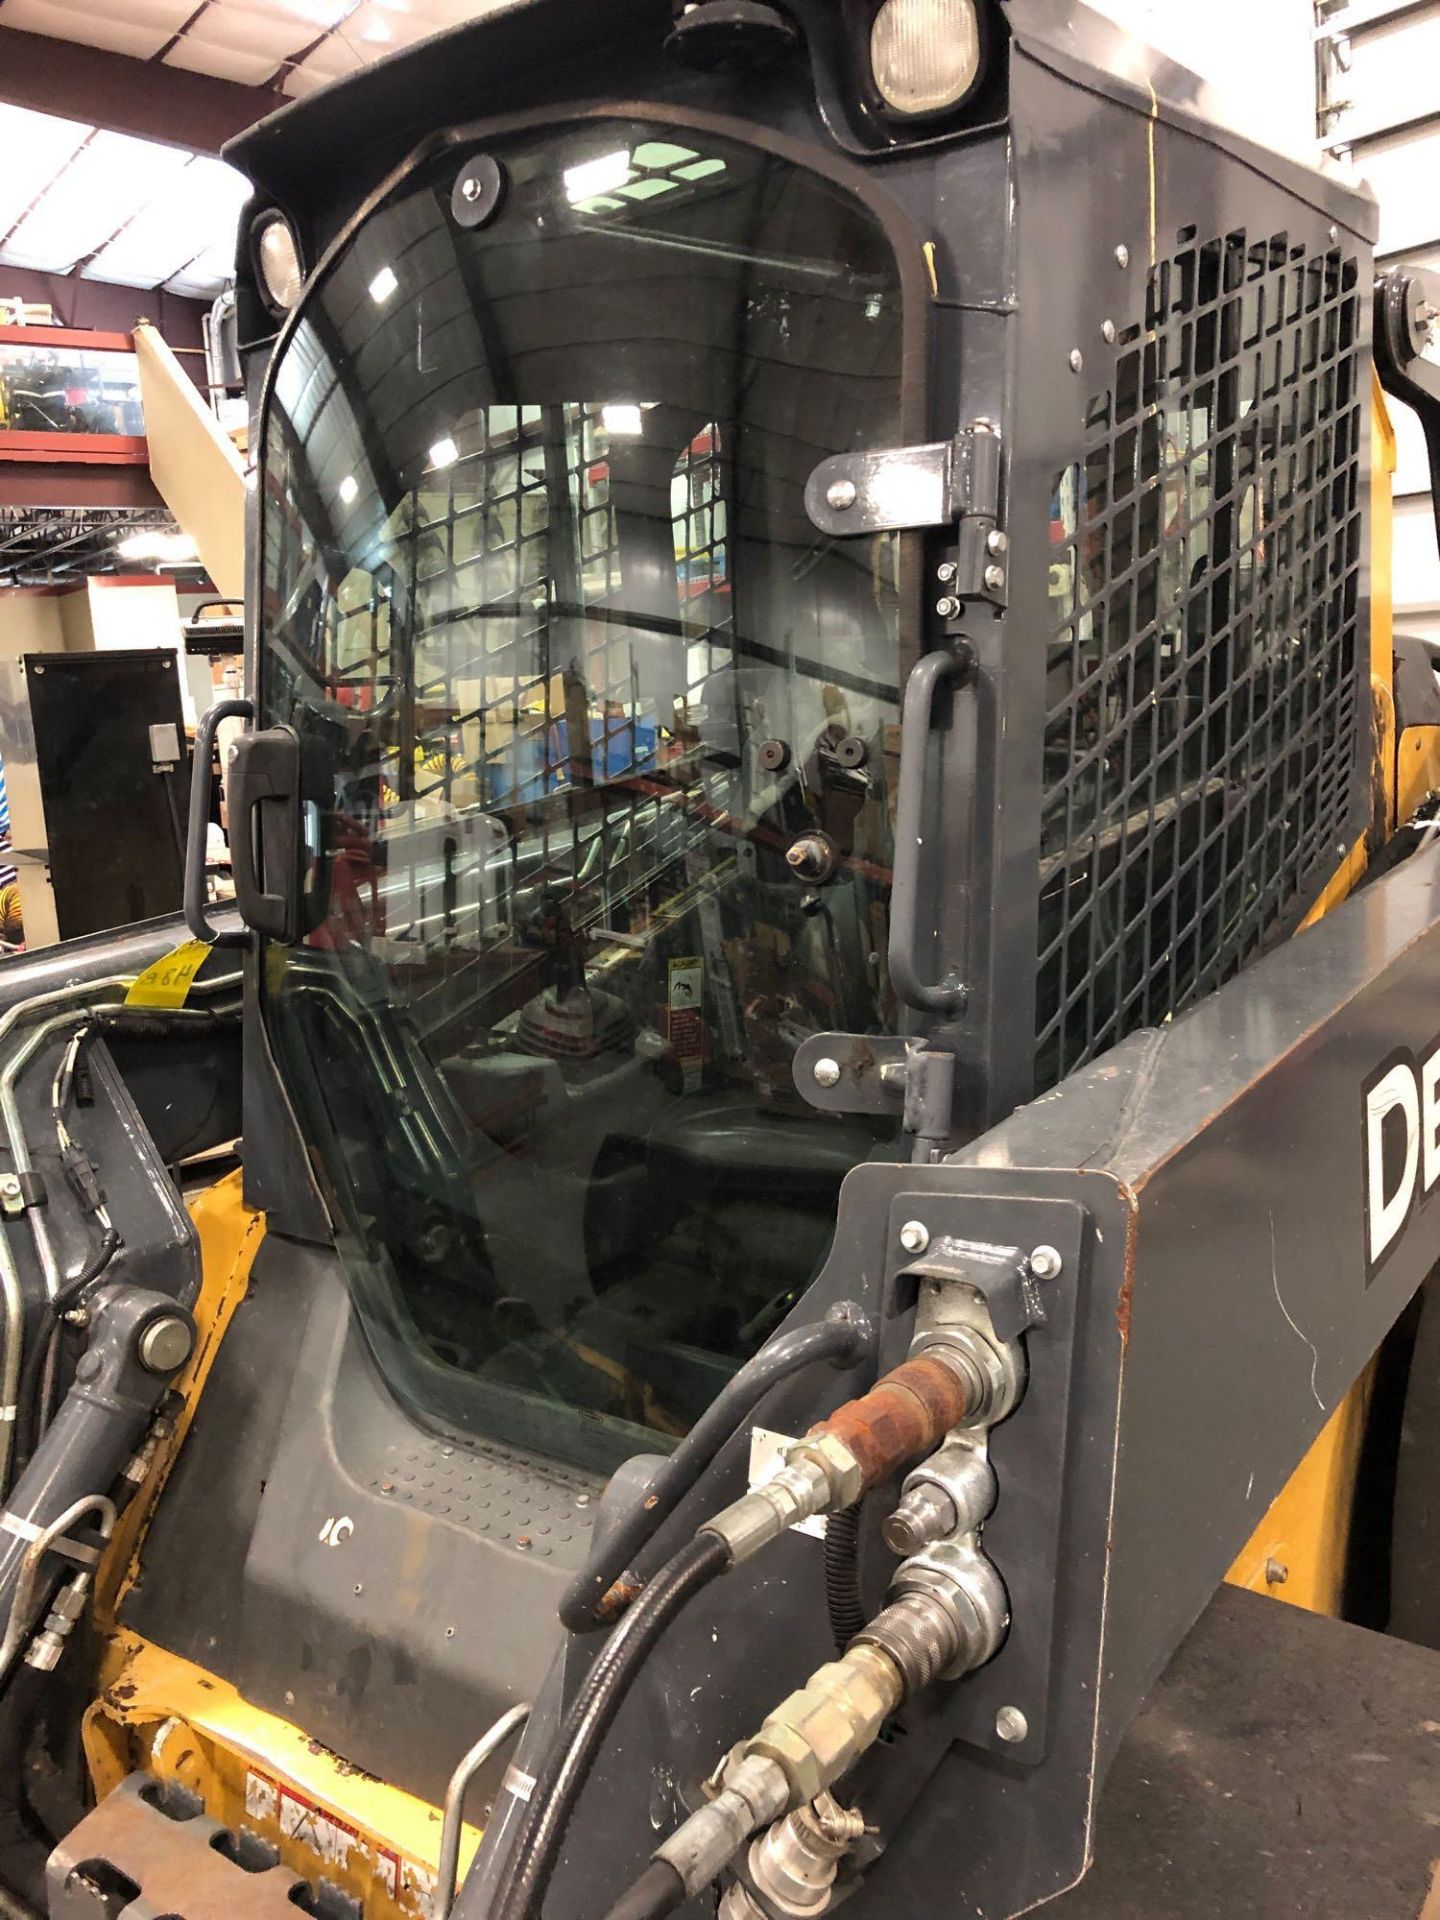 2015 JOHN DEERE 320E SKID STEER, ENCLOSED CAB, HEAT AND A/C 2 SPEED HYDRAULIC COUPLER, RUNS AND OPER - Image 7 of 9